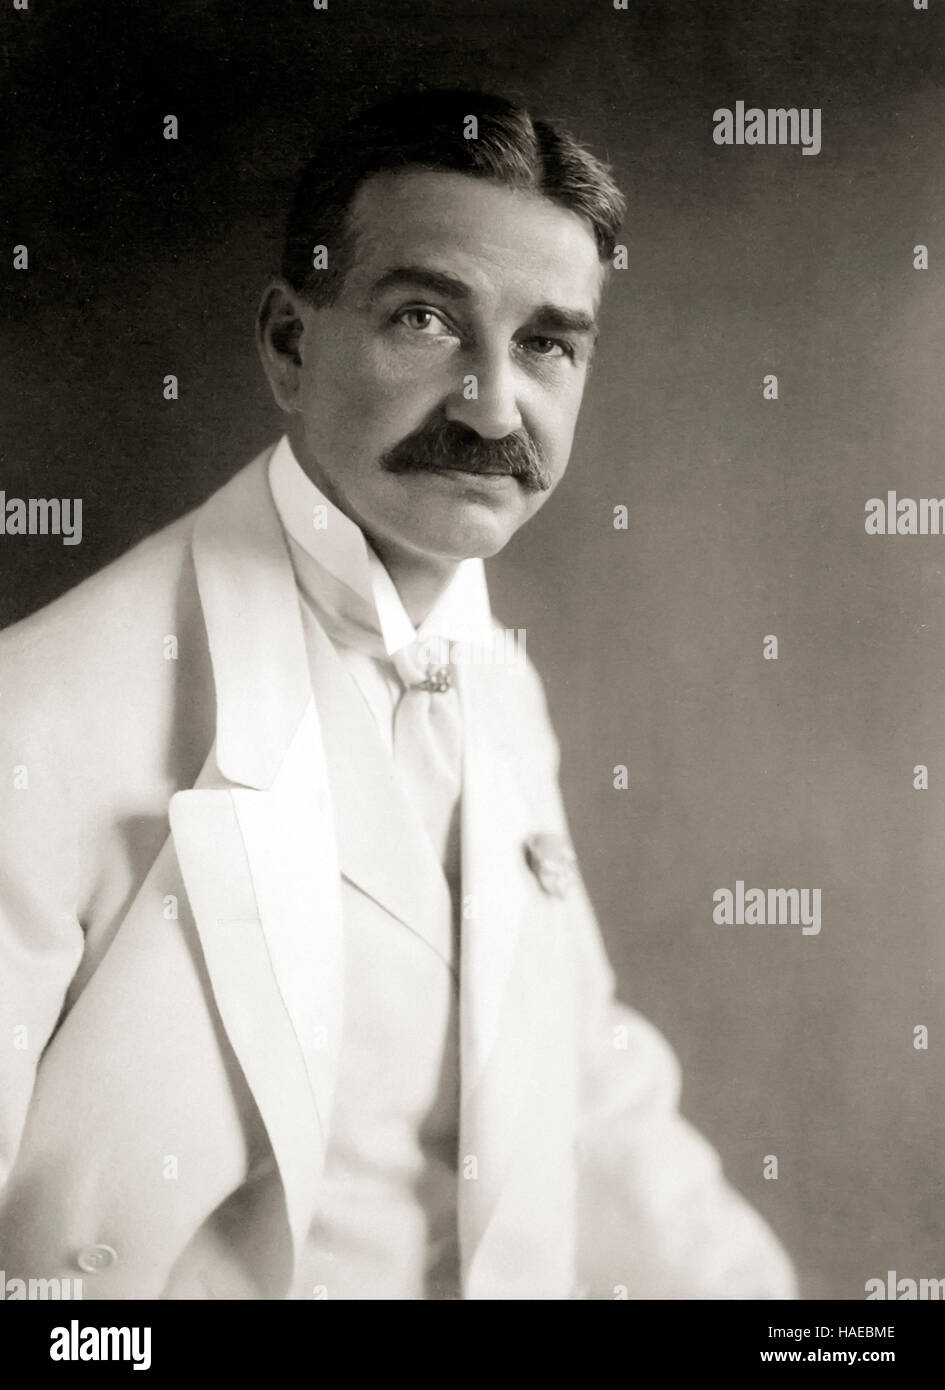 L. Frank Baum (1856-1919) prolific American author of children’s books including The Wonderful Wizard of Oz and its 13 sequels. Studio photograph circa 1908. Stock Photo